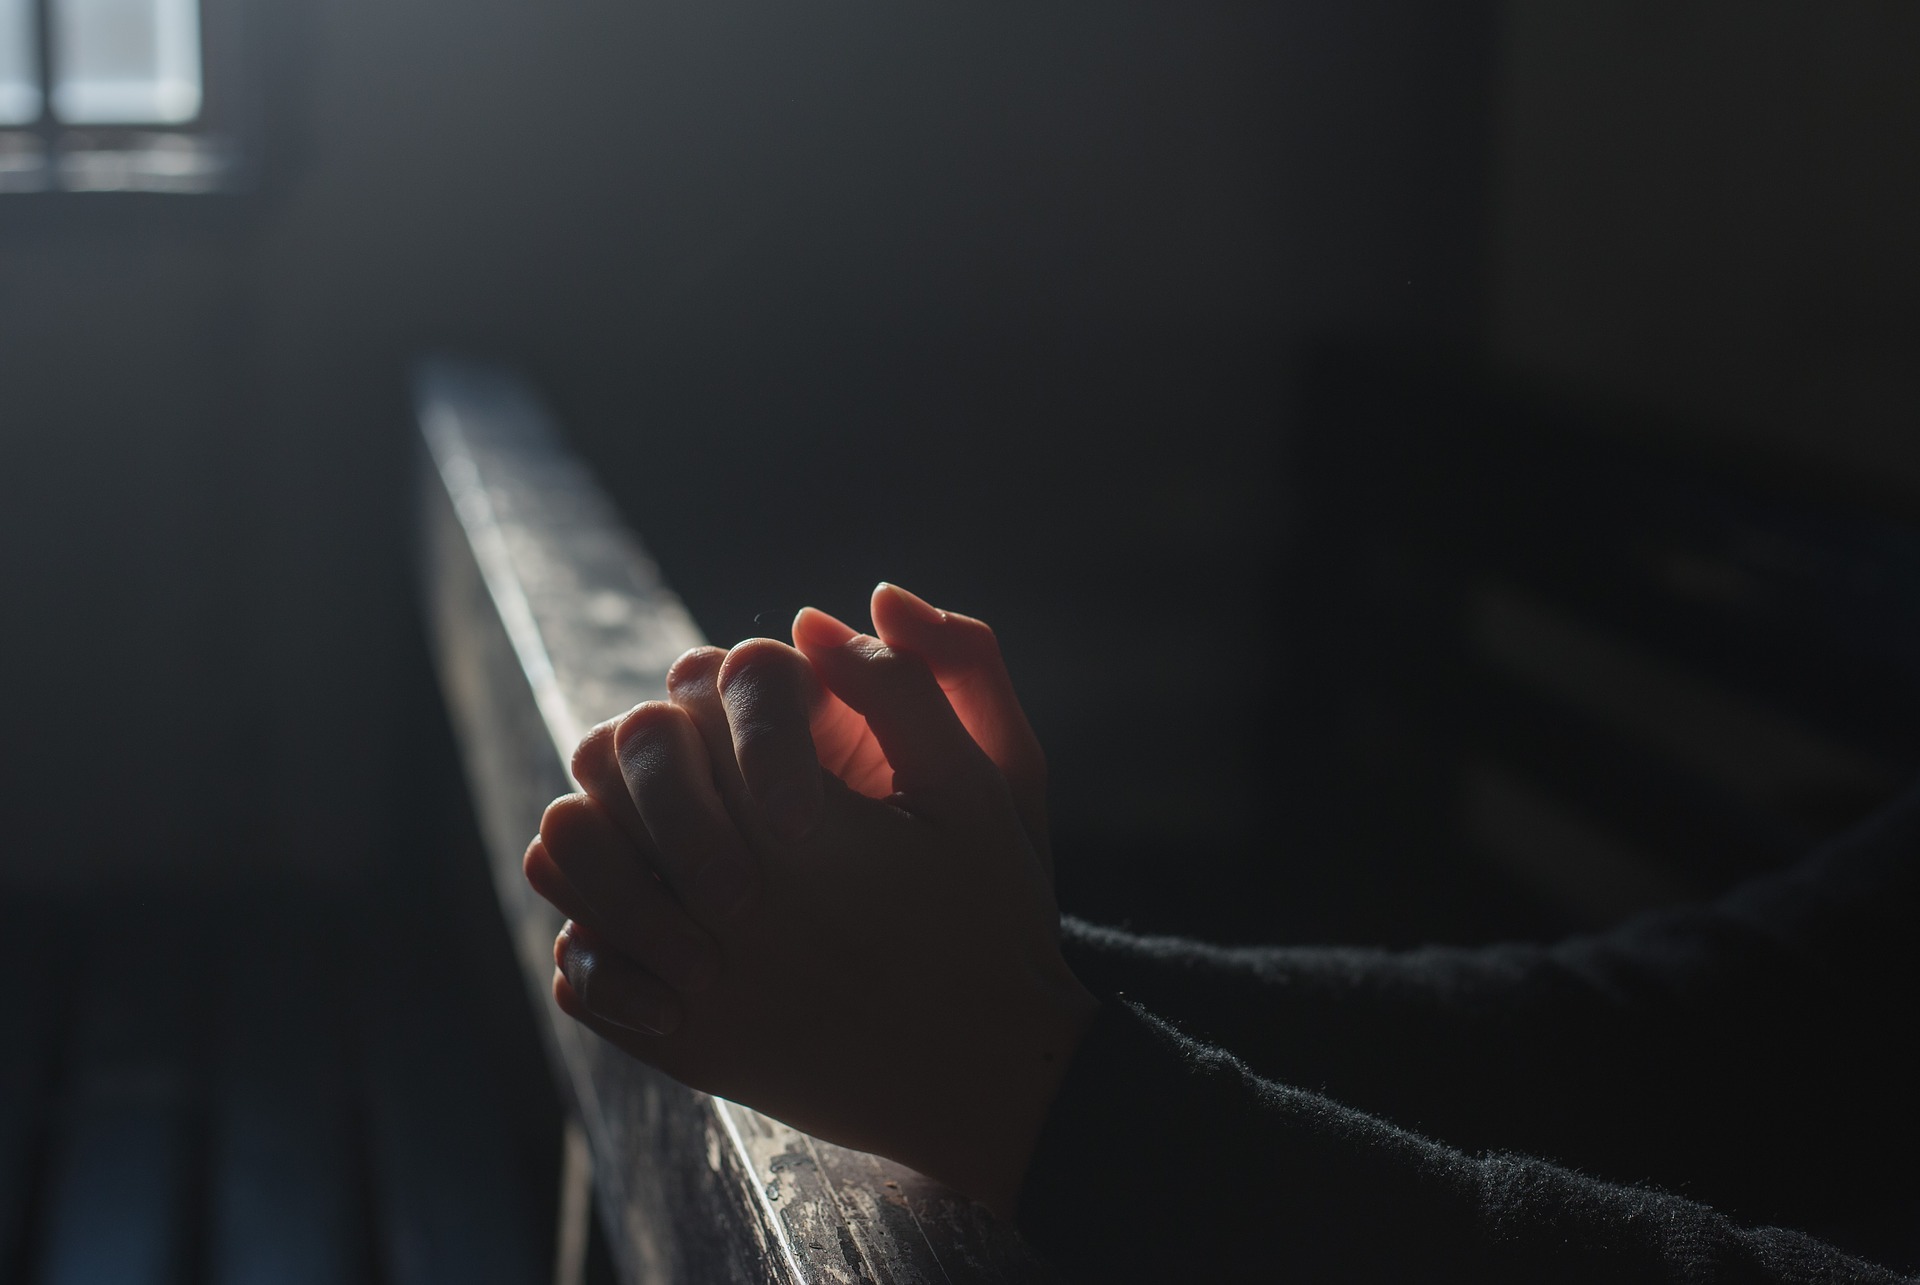 Why To Pray With An Expectation Might Be Foolish